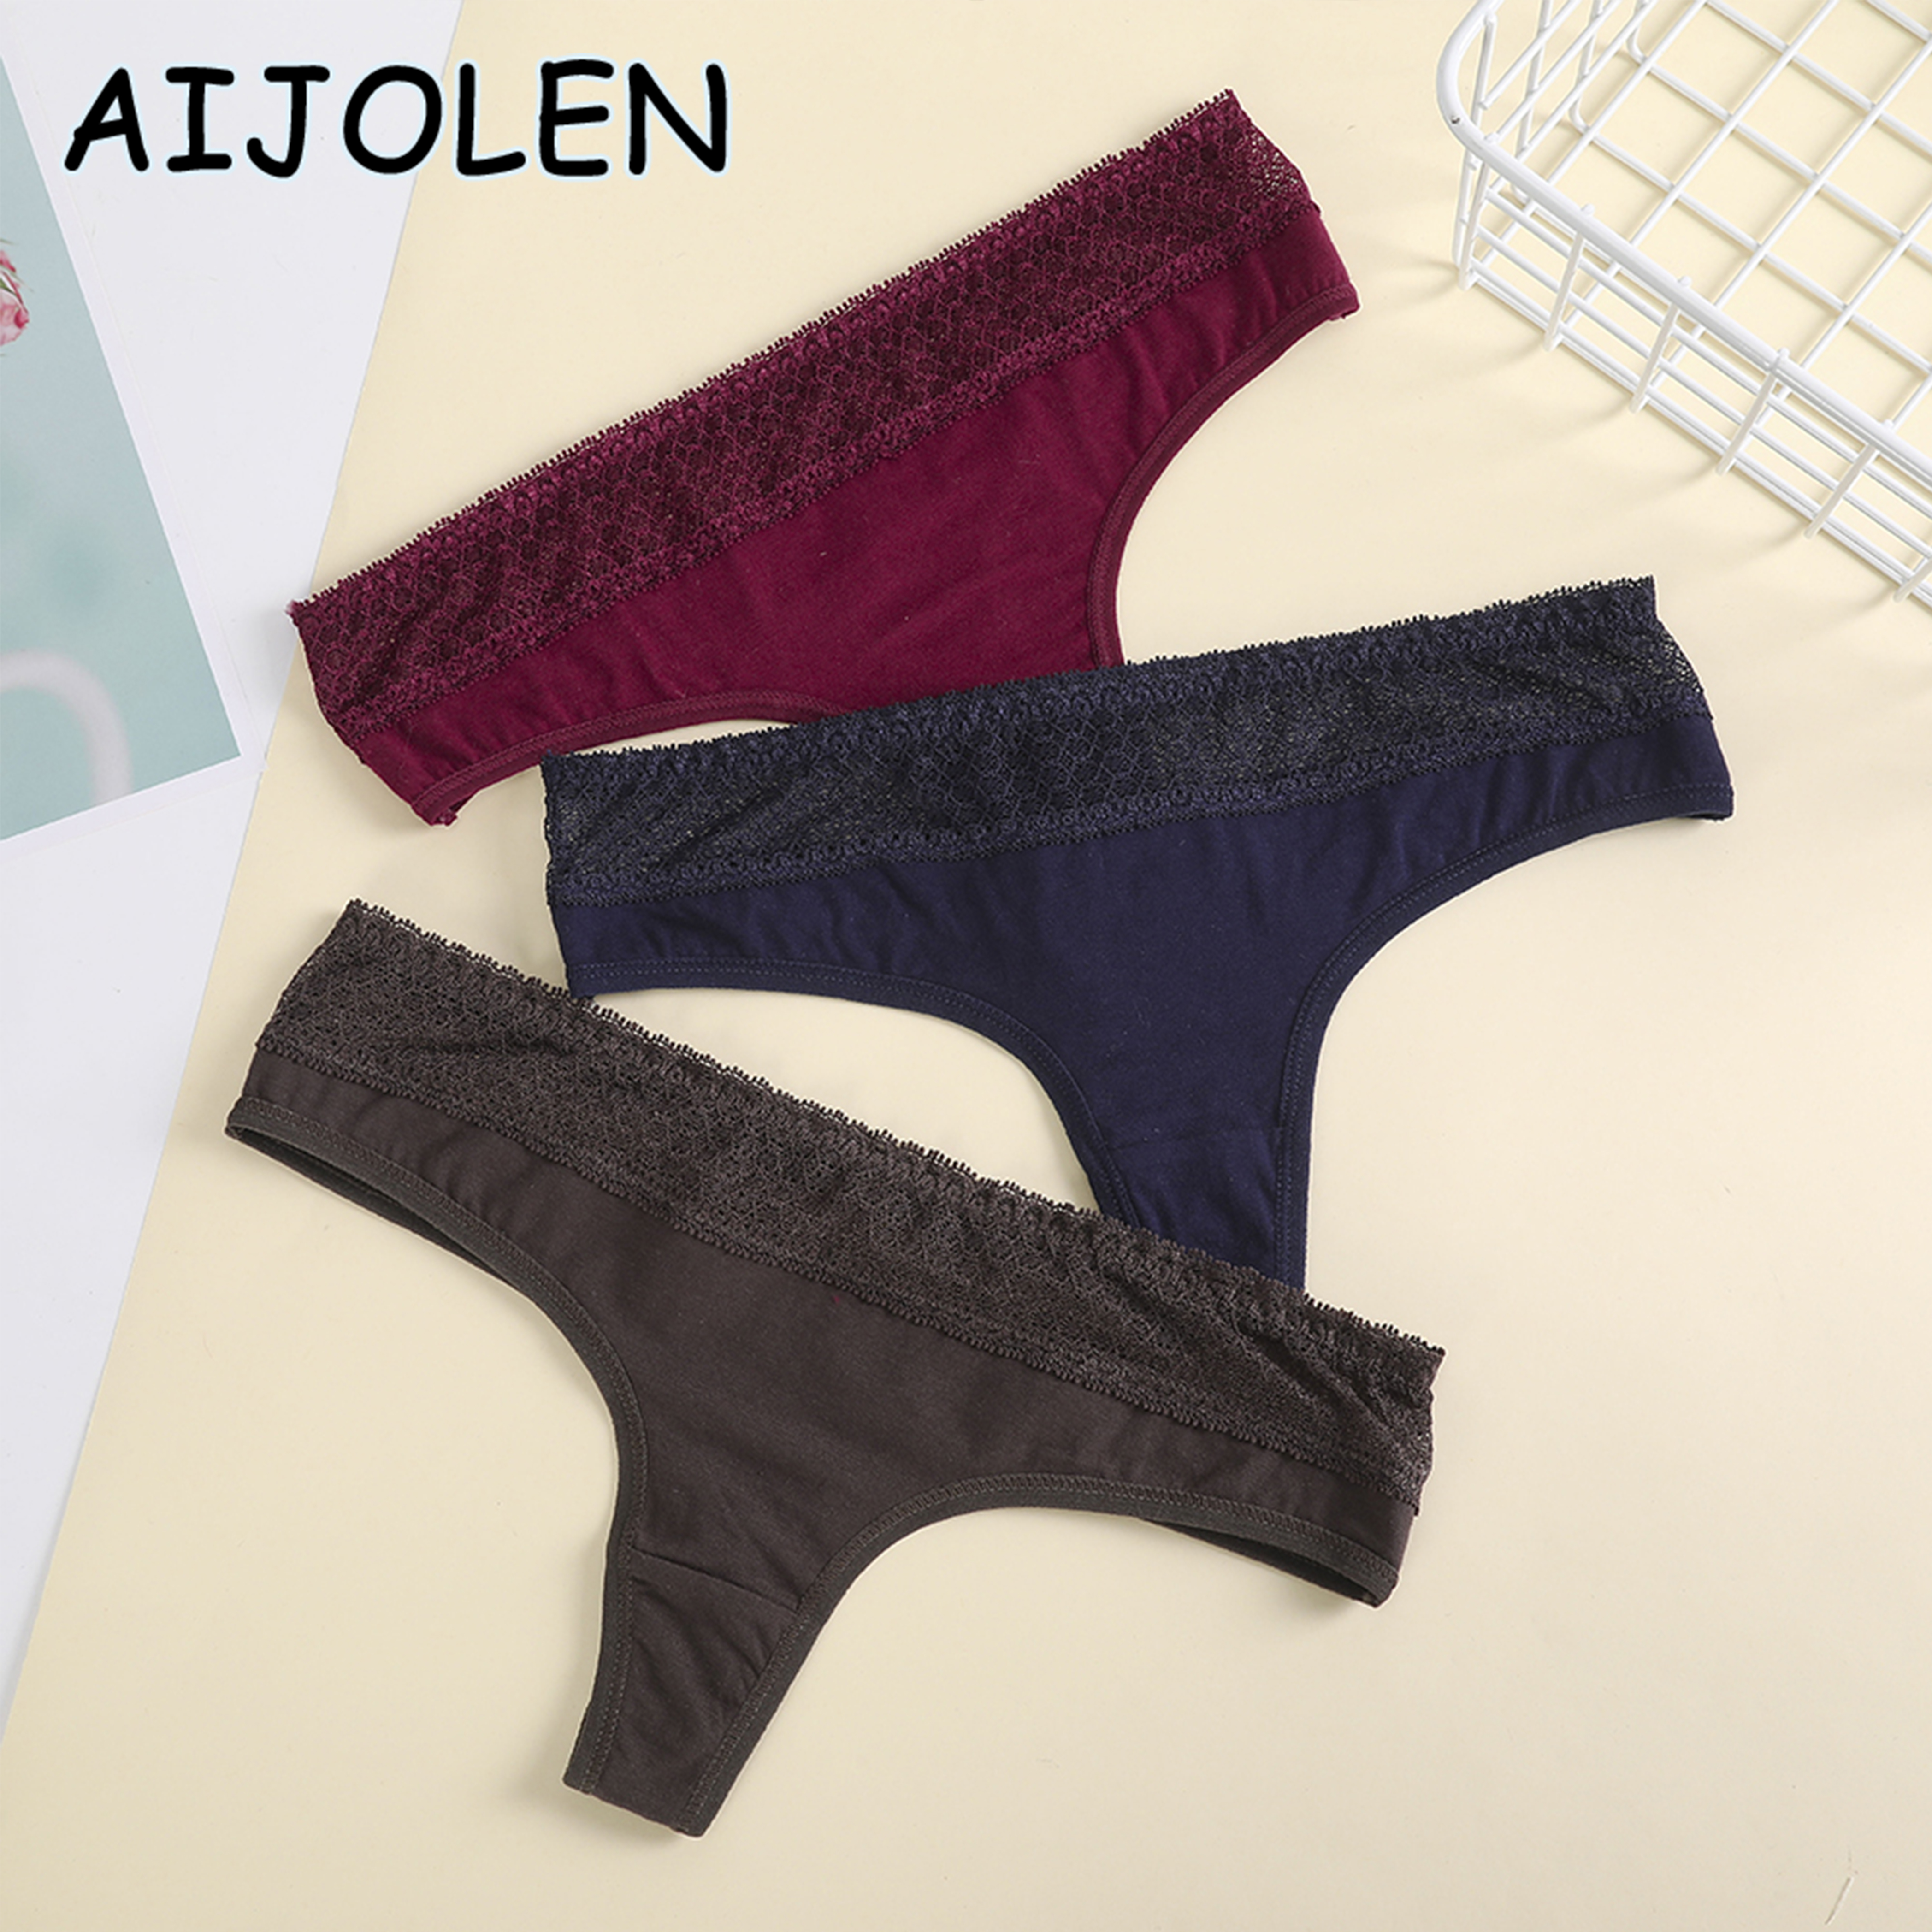 Aijolen Cotton G String Thong,Womens T-Back Tangas Low Rise